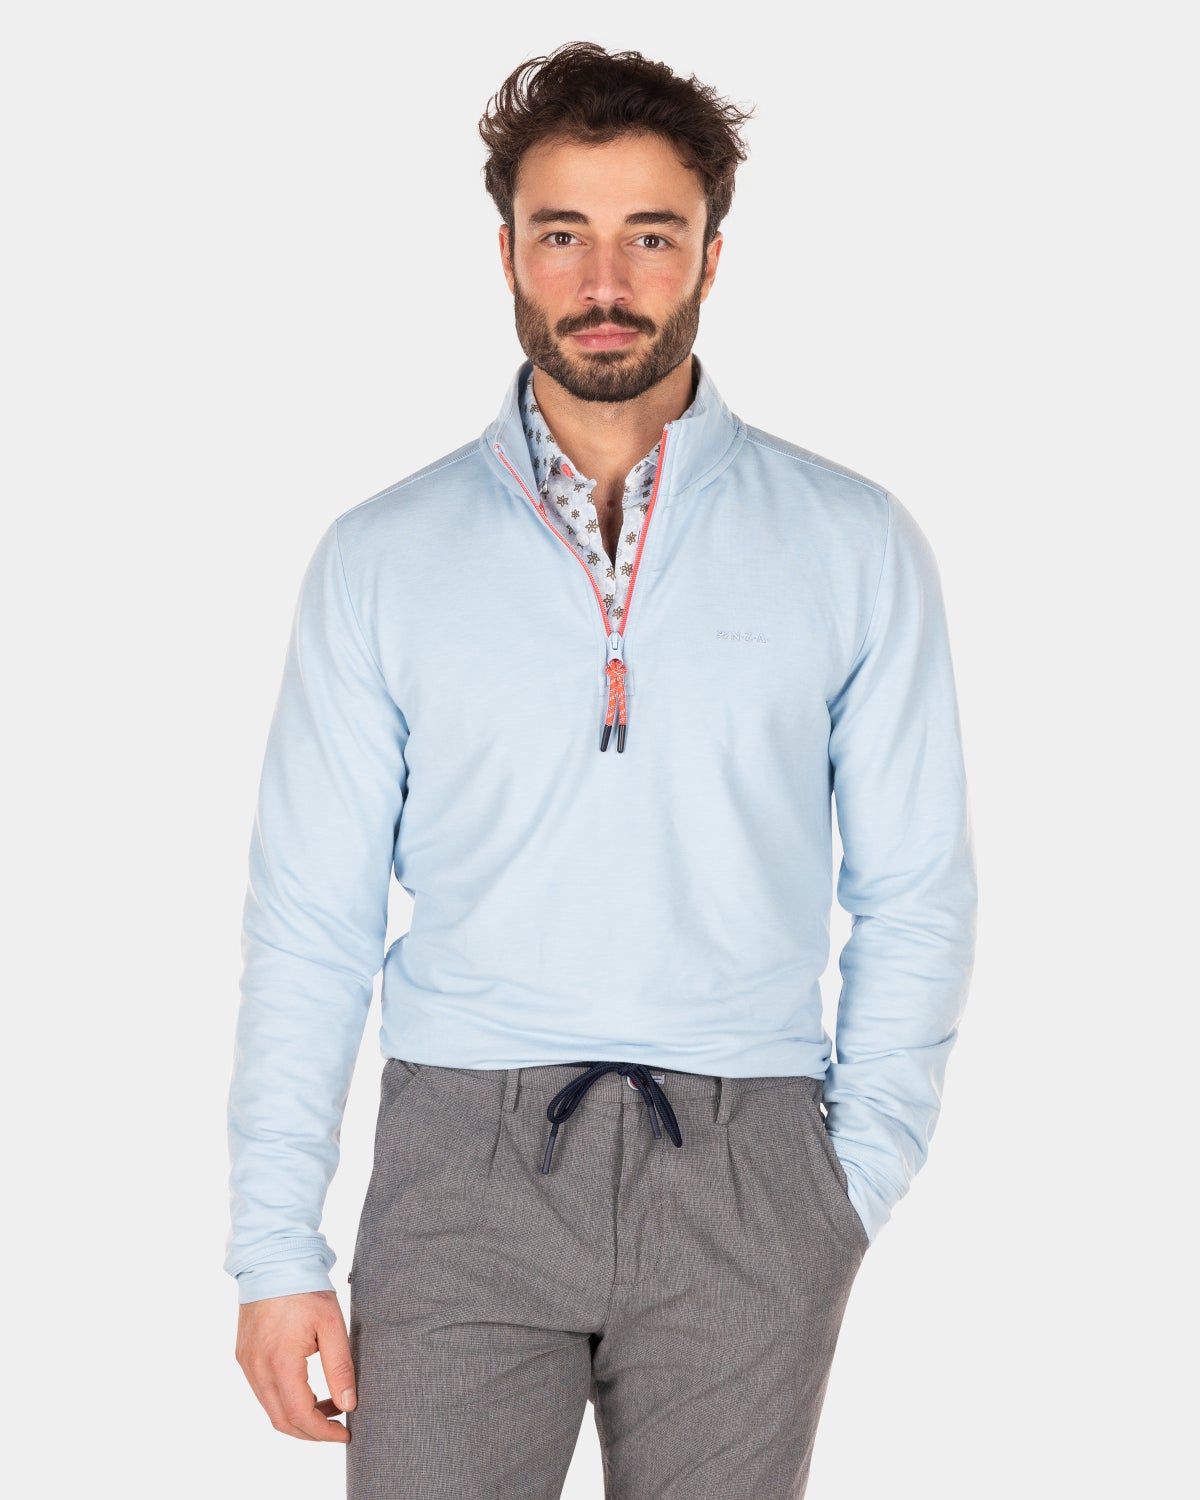 Polyester and viscose half zip sweater - Universal Blue